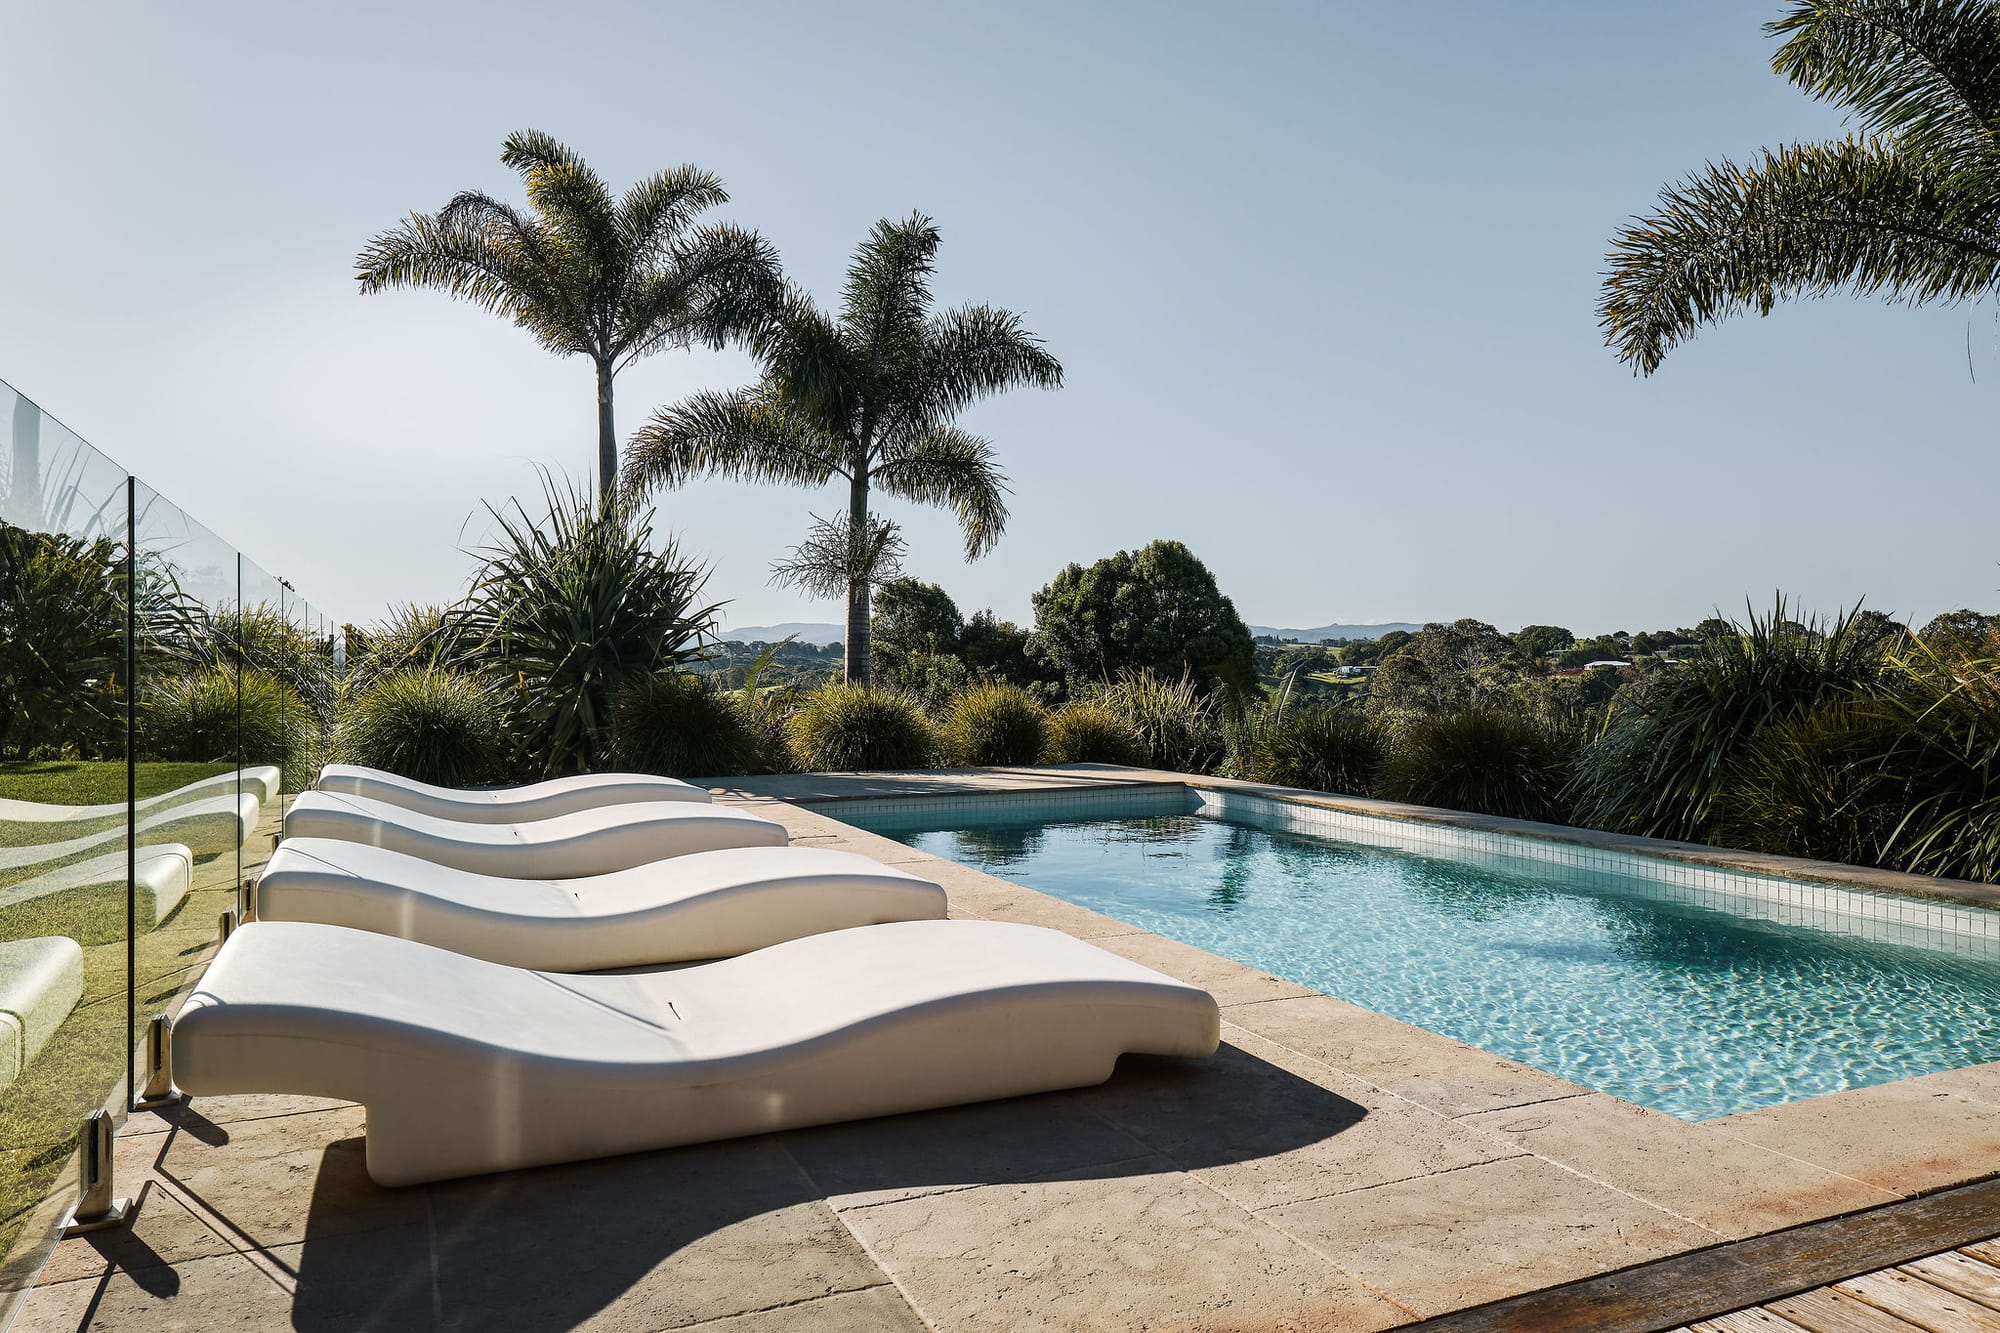 Rockpool Farm Byron Bay. Photography by Andy Macpherson. White chaise lounge recliners by outdoor pool. Stone pavers. Views of hills and plants behind pool.